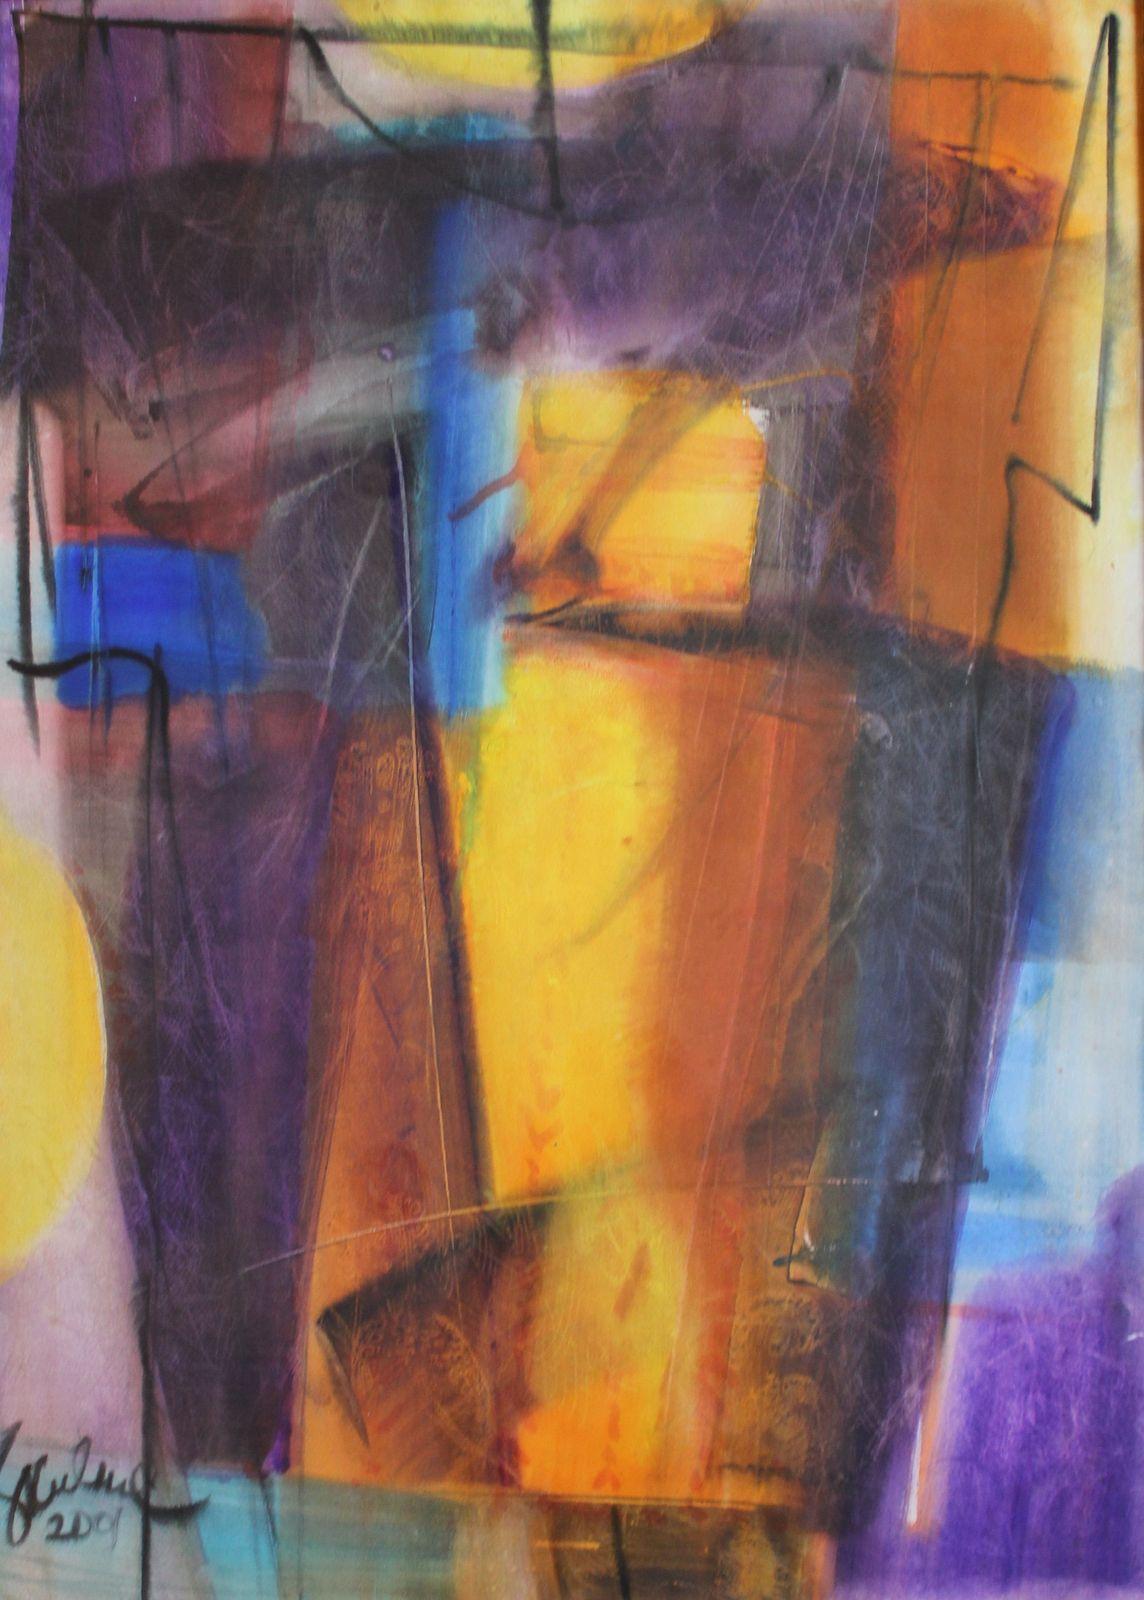 Dzemma Skulme Abstract Drawing - 2001. paper, watercolor, 103x73 cm